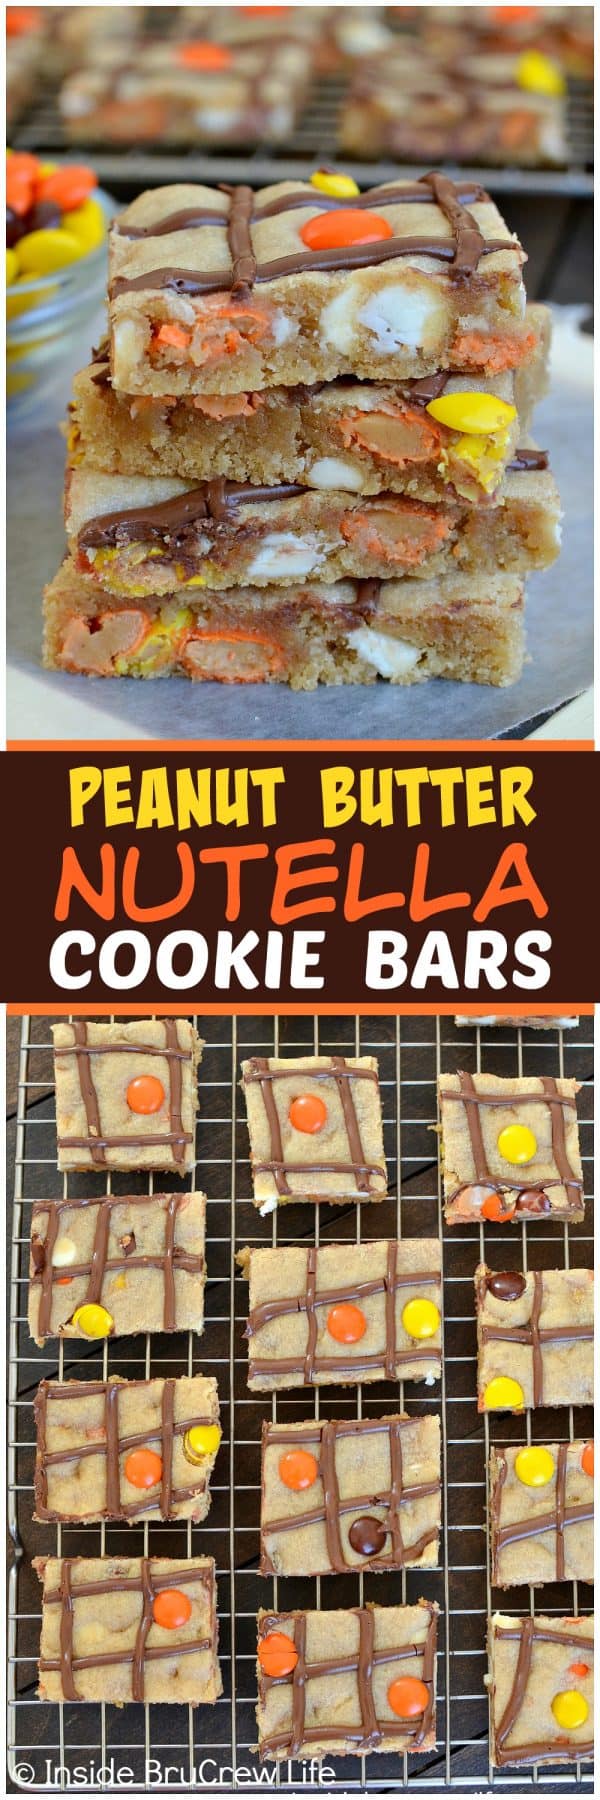 Peanut Butter Nutella Cookie Bars - these easy bar cookies are loaded with white chocolate, Reese's pieces, and Nutella drizzles. Great recipe when you want cookies in a hurry!